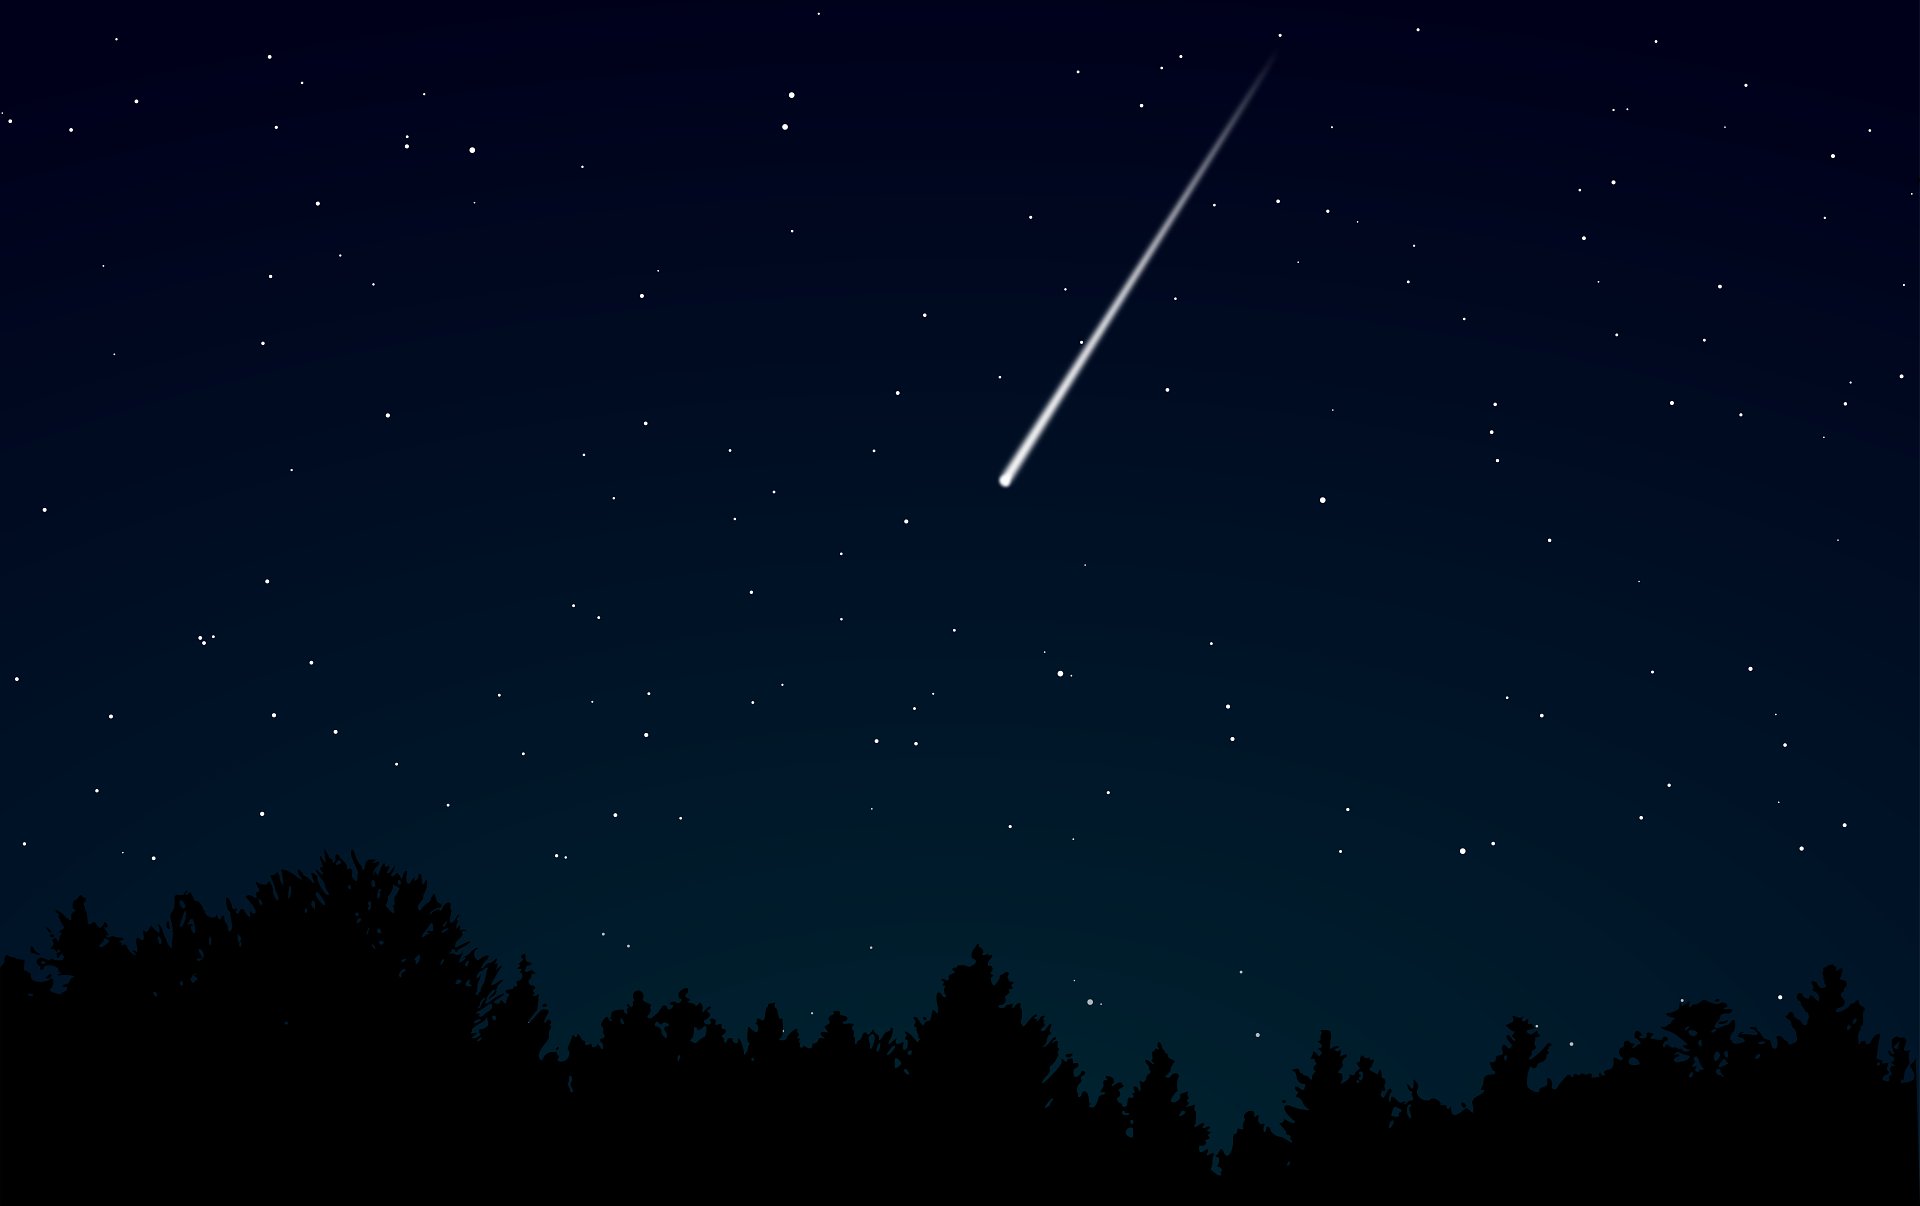 Meteor shower, supermoon will brighten Thursday's night sky—but that's a problem